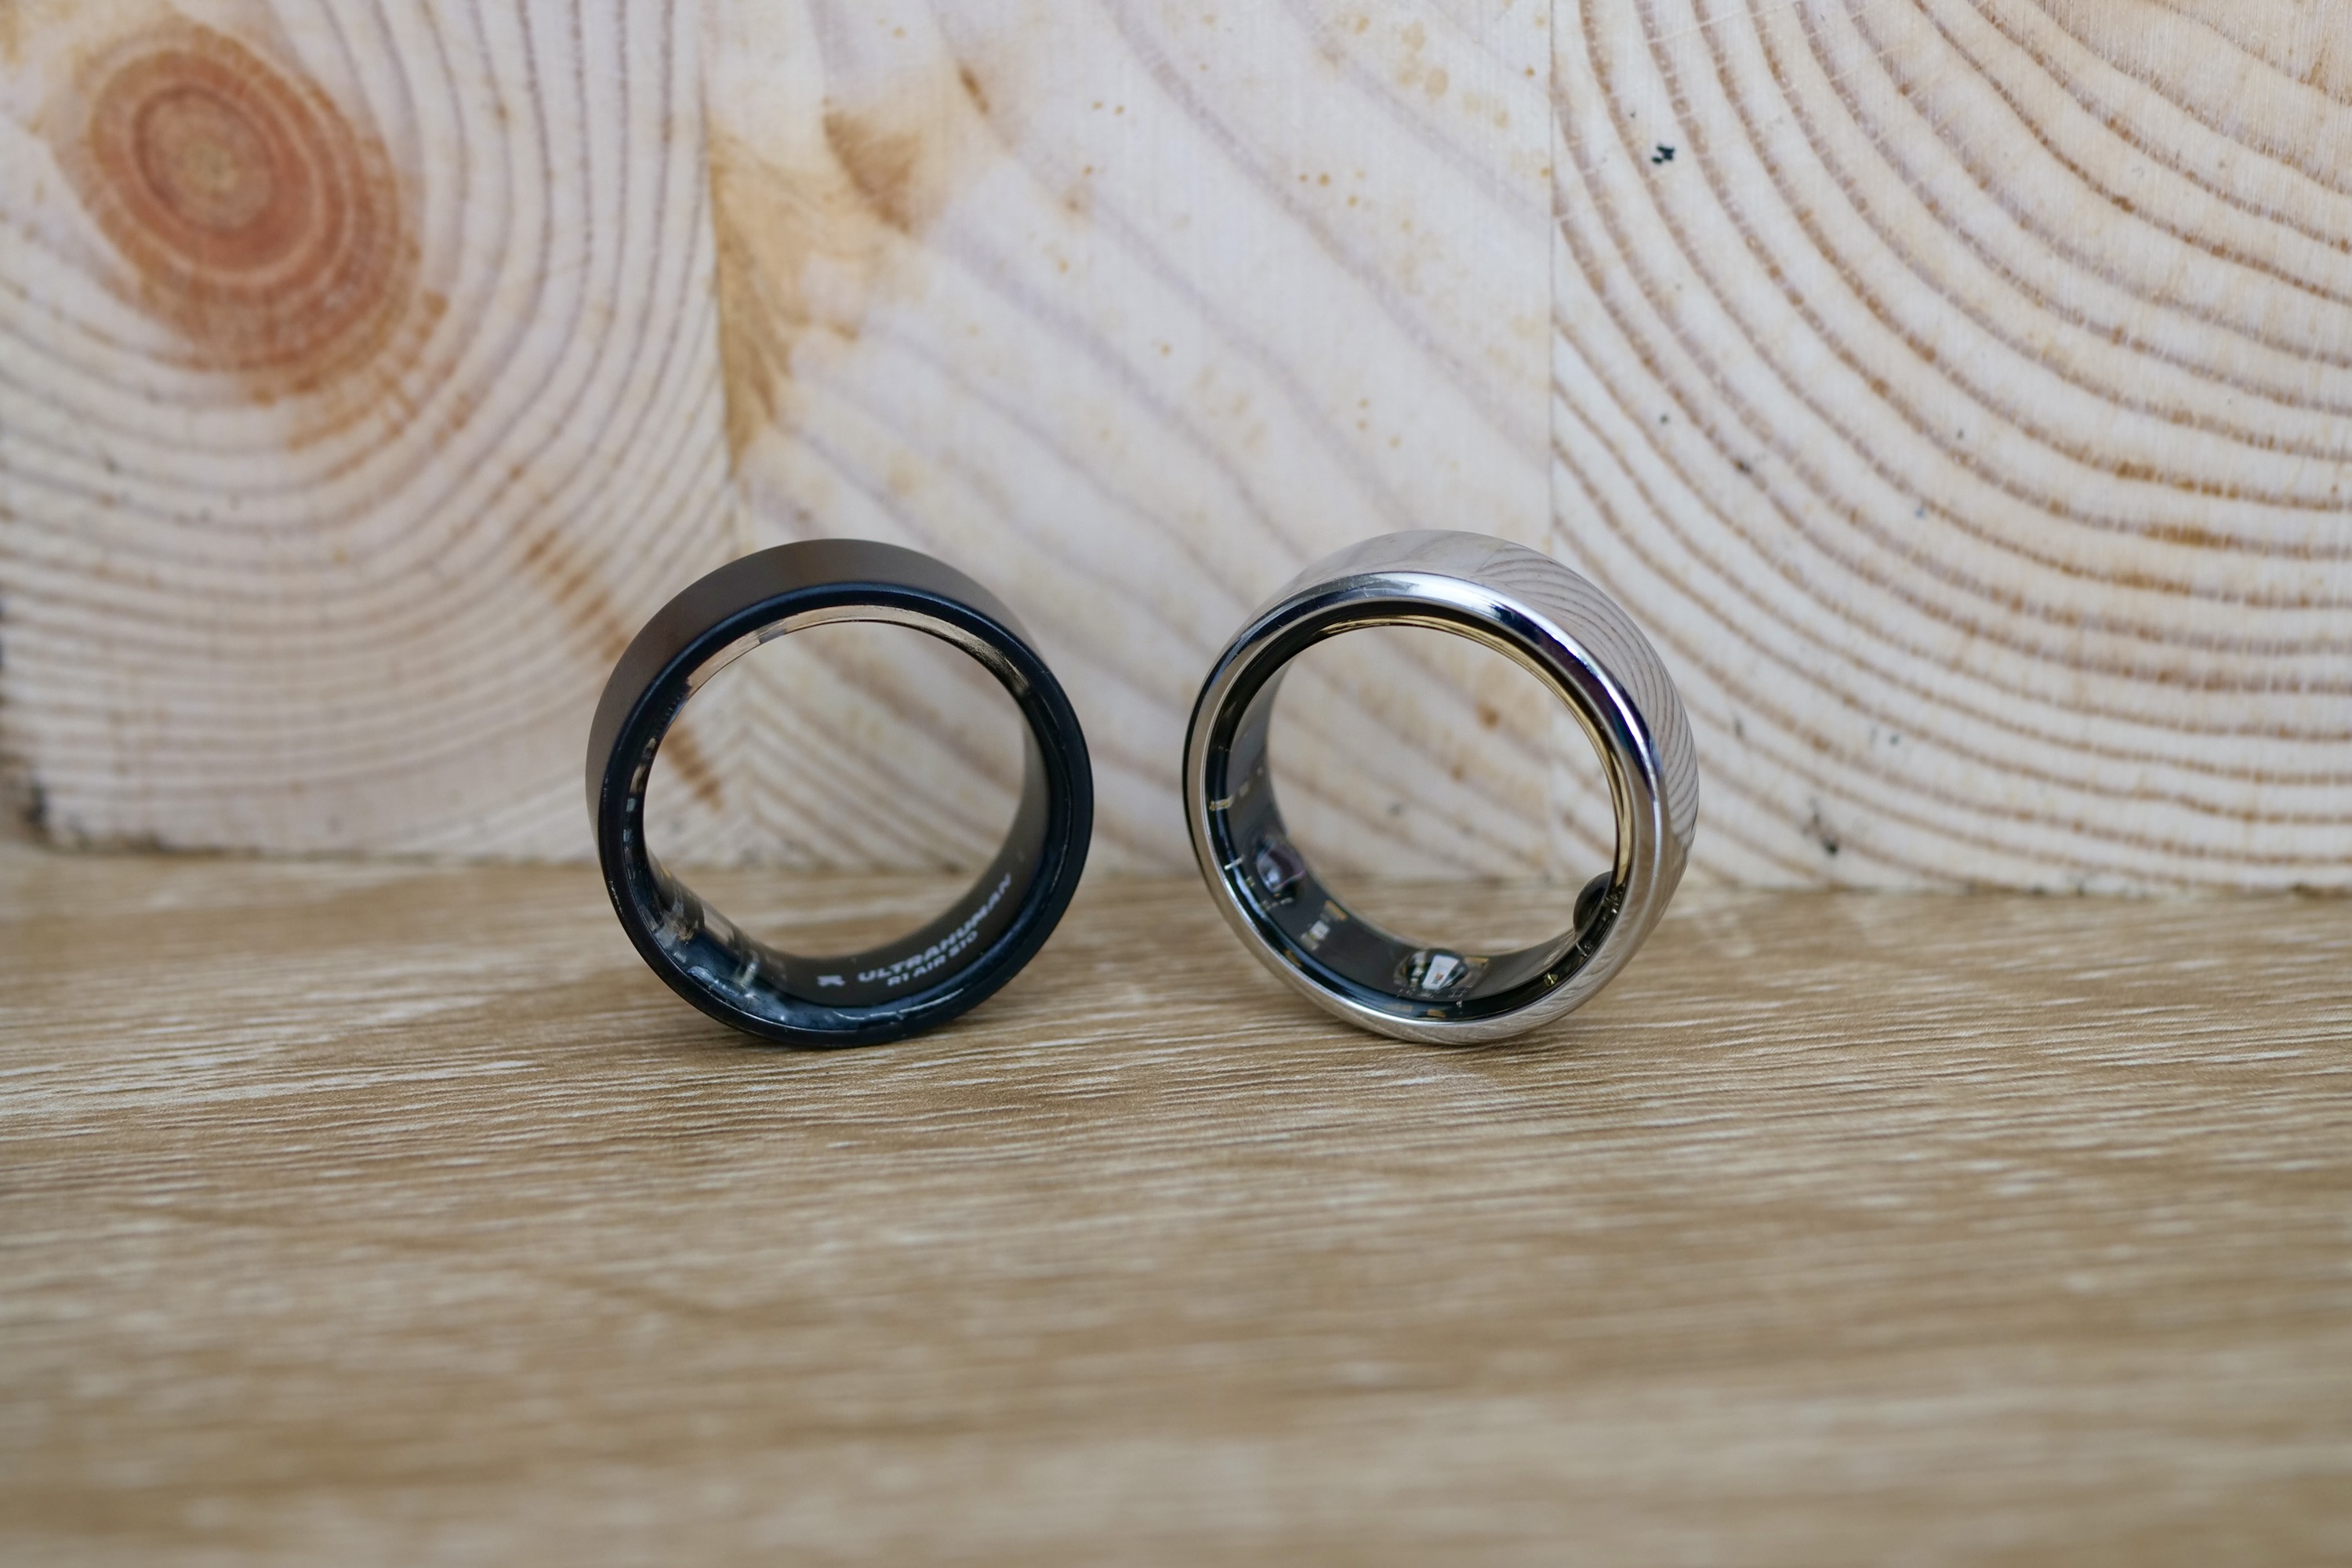 Oura Ring 3 vs RingConn Smart Ring: What is the difference?